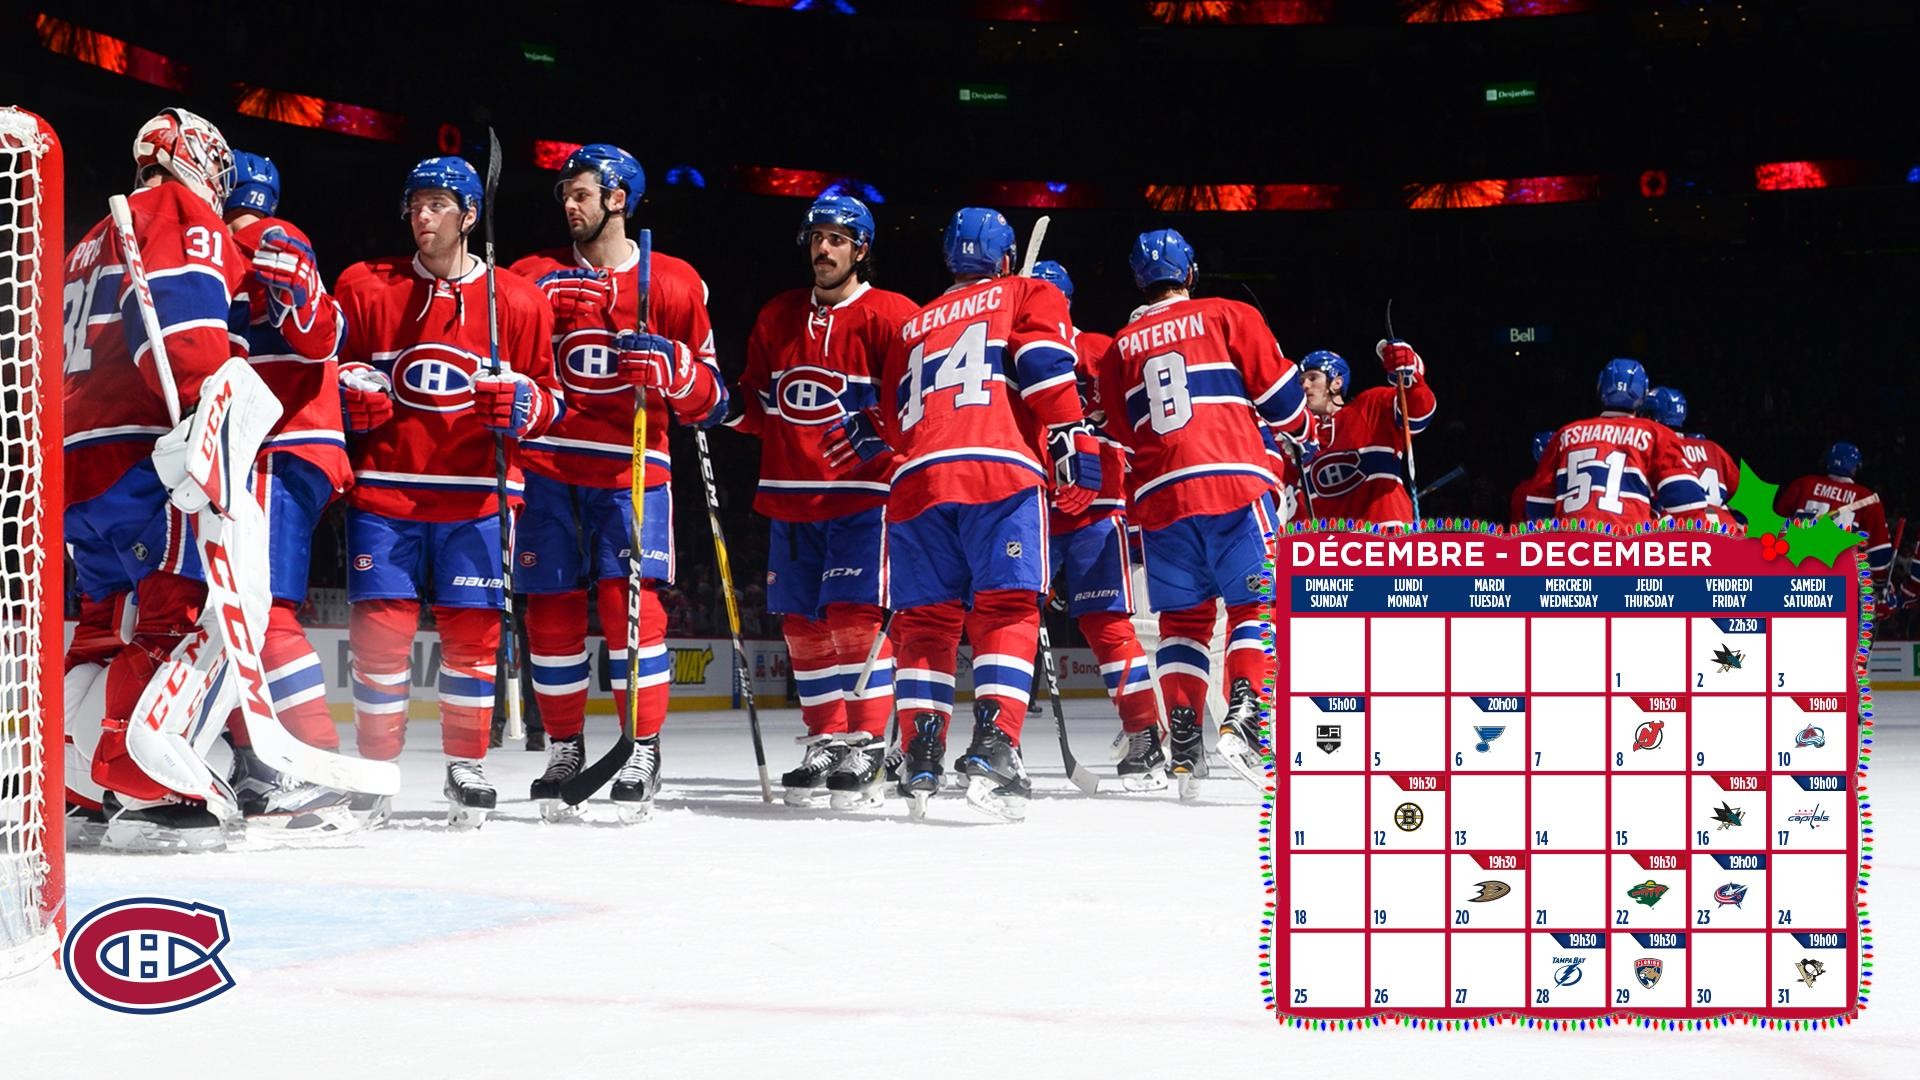 1920x1080 The official Montreal Canadiens desktop wallpaper for December.